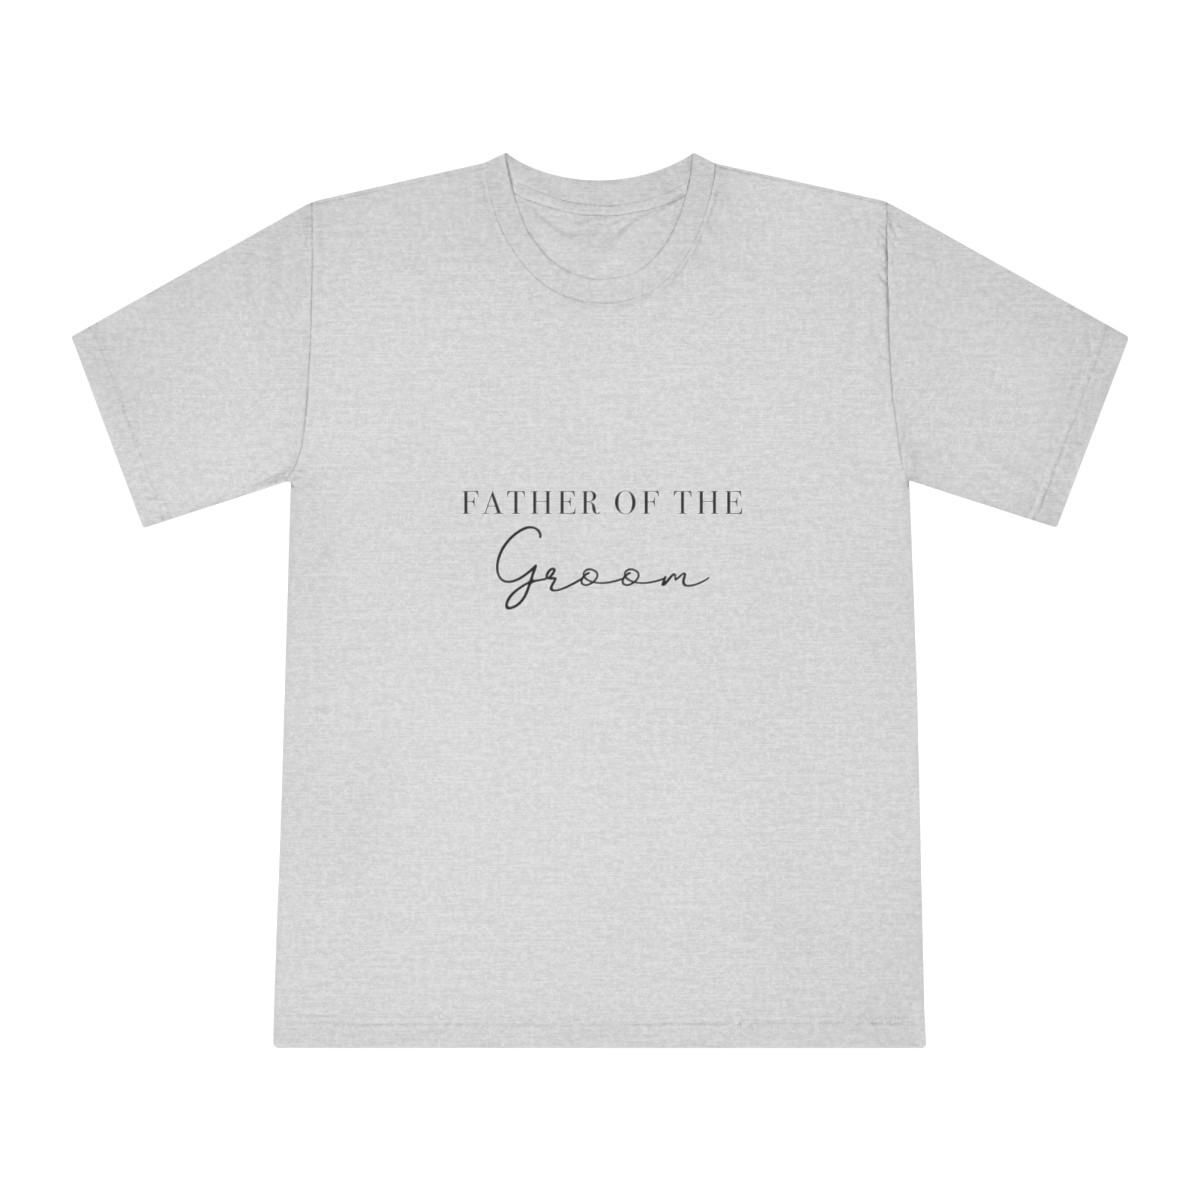 Father of The Groom T-Shirt!